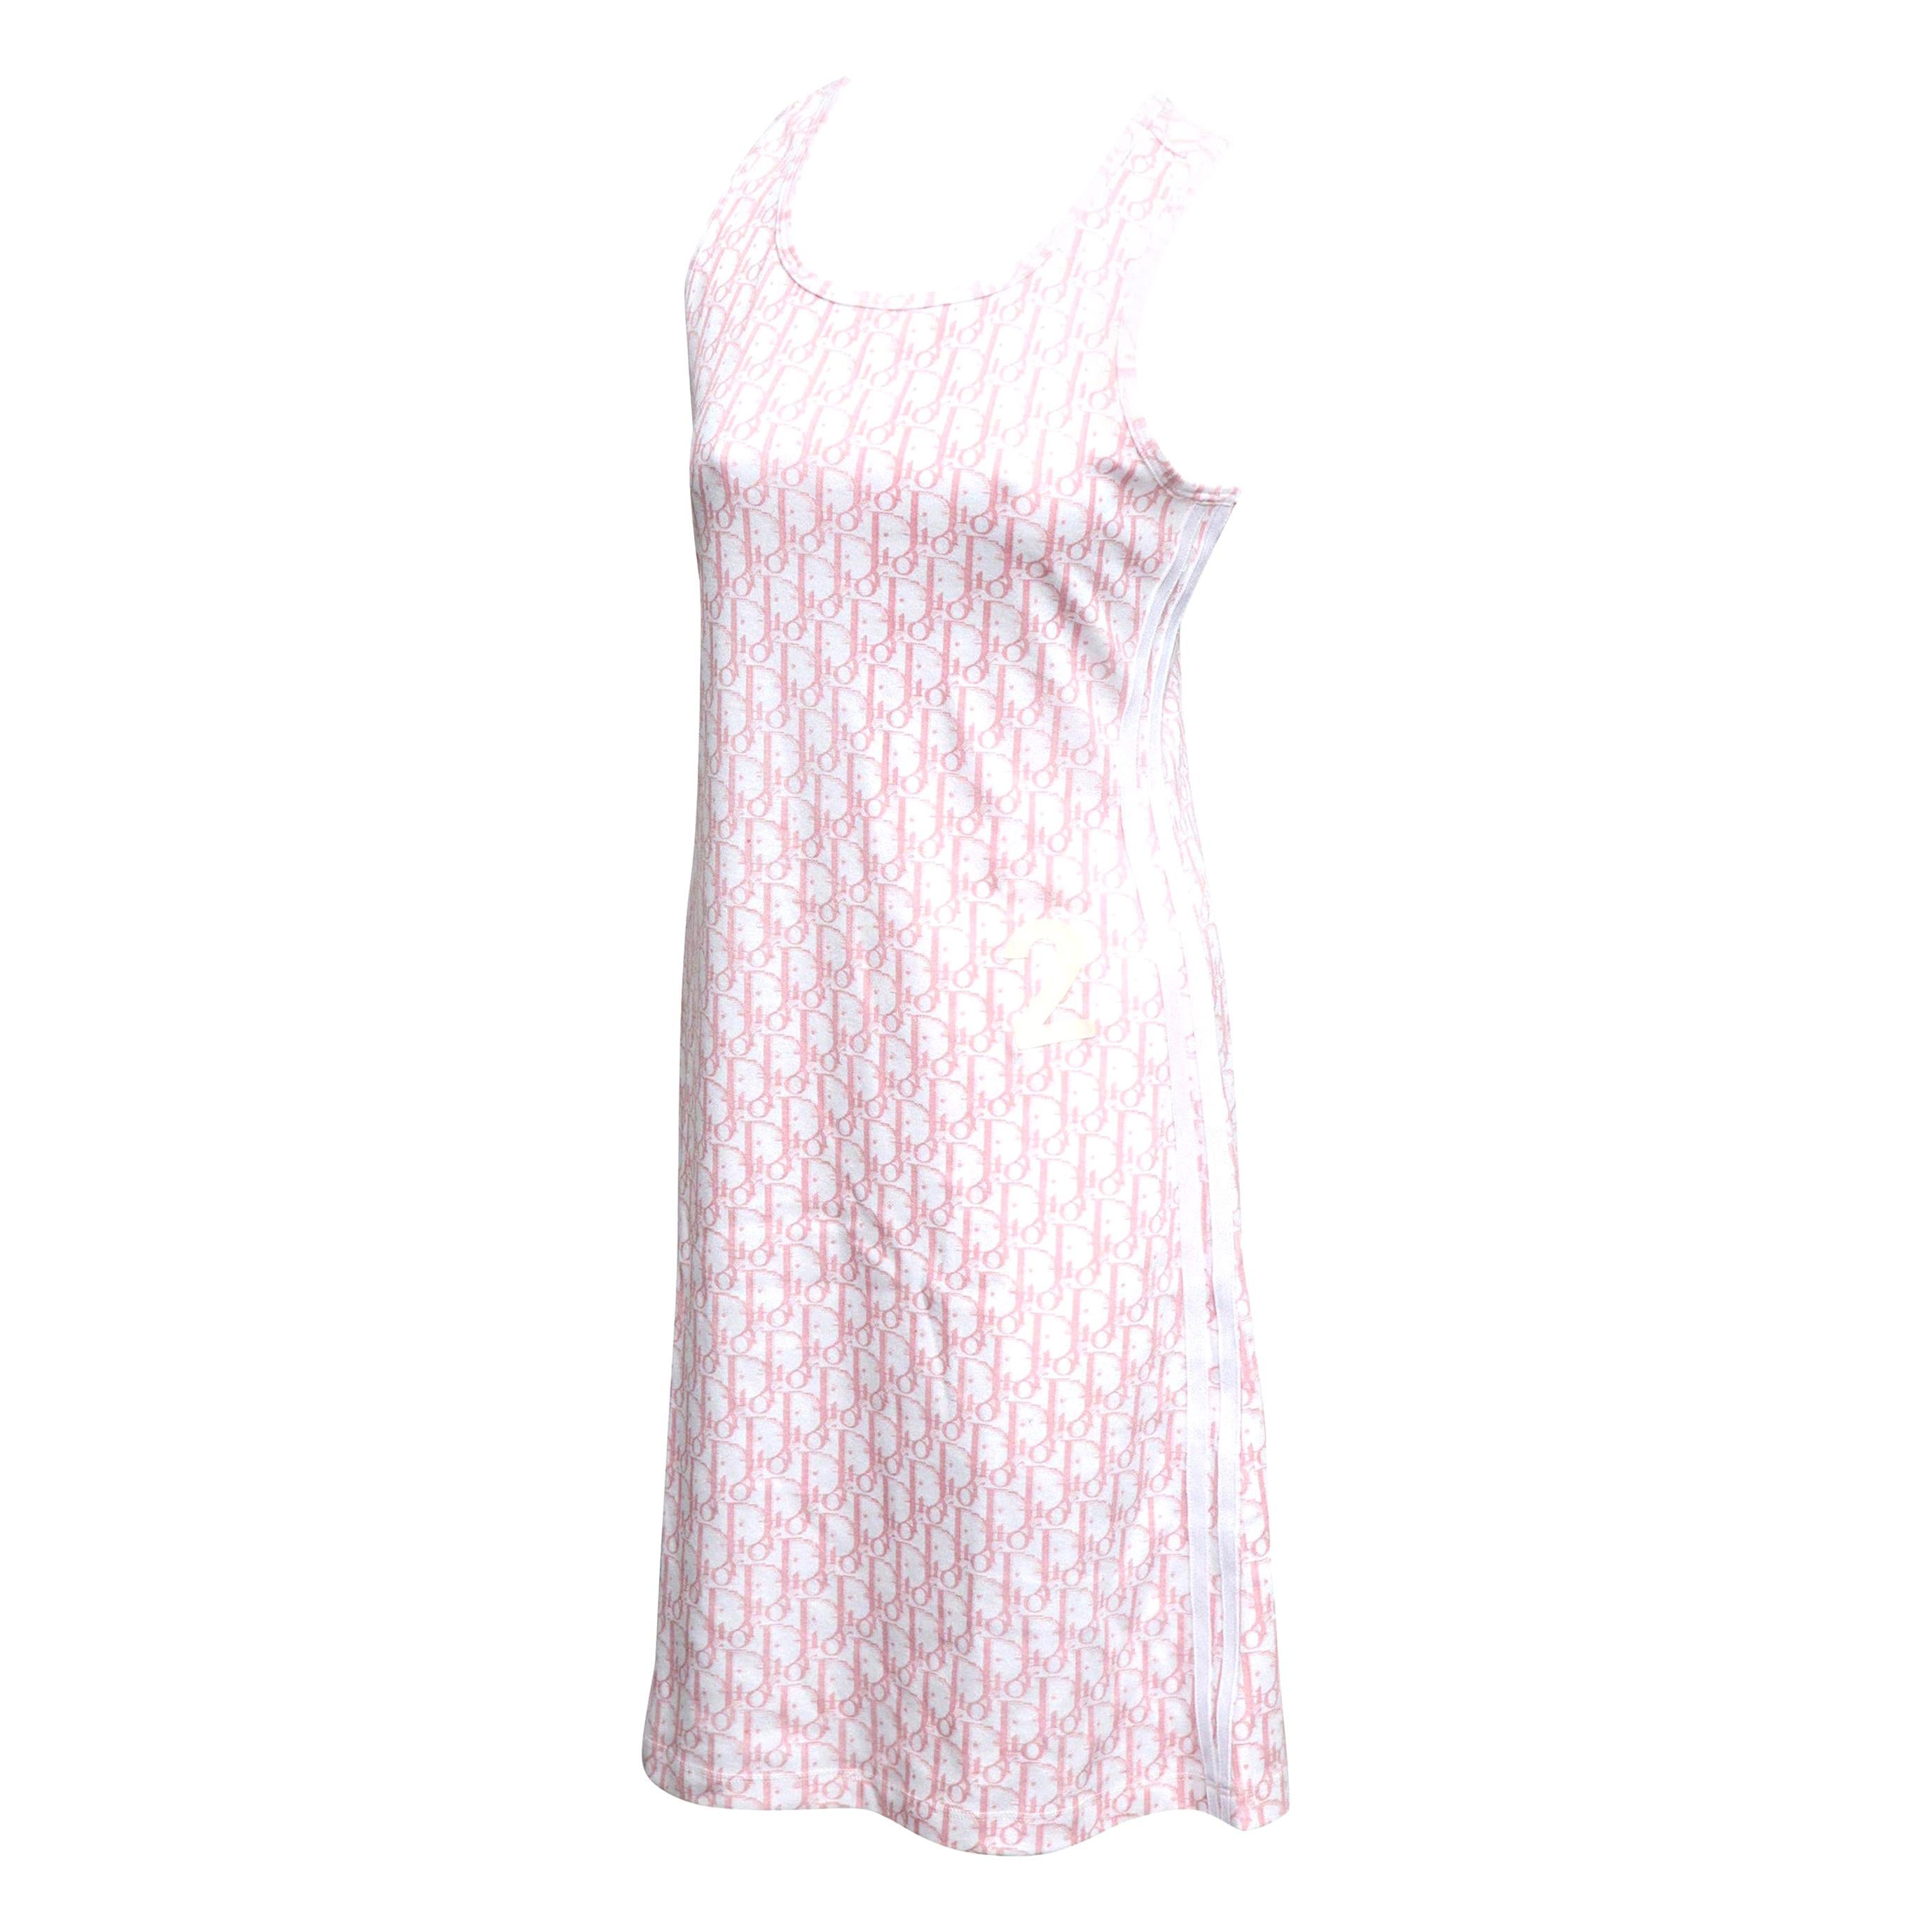 John Galliano for Christian Dior Trotter Logo Pink Dress For Sale